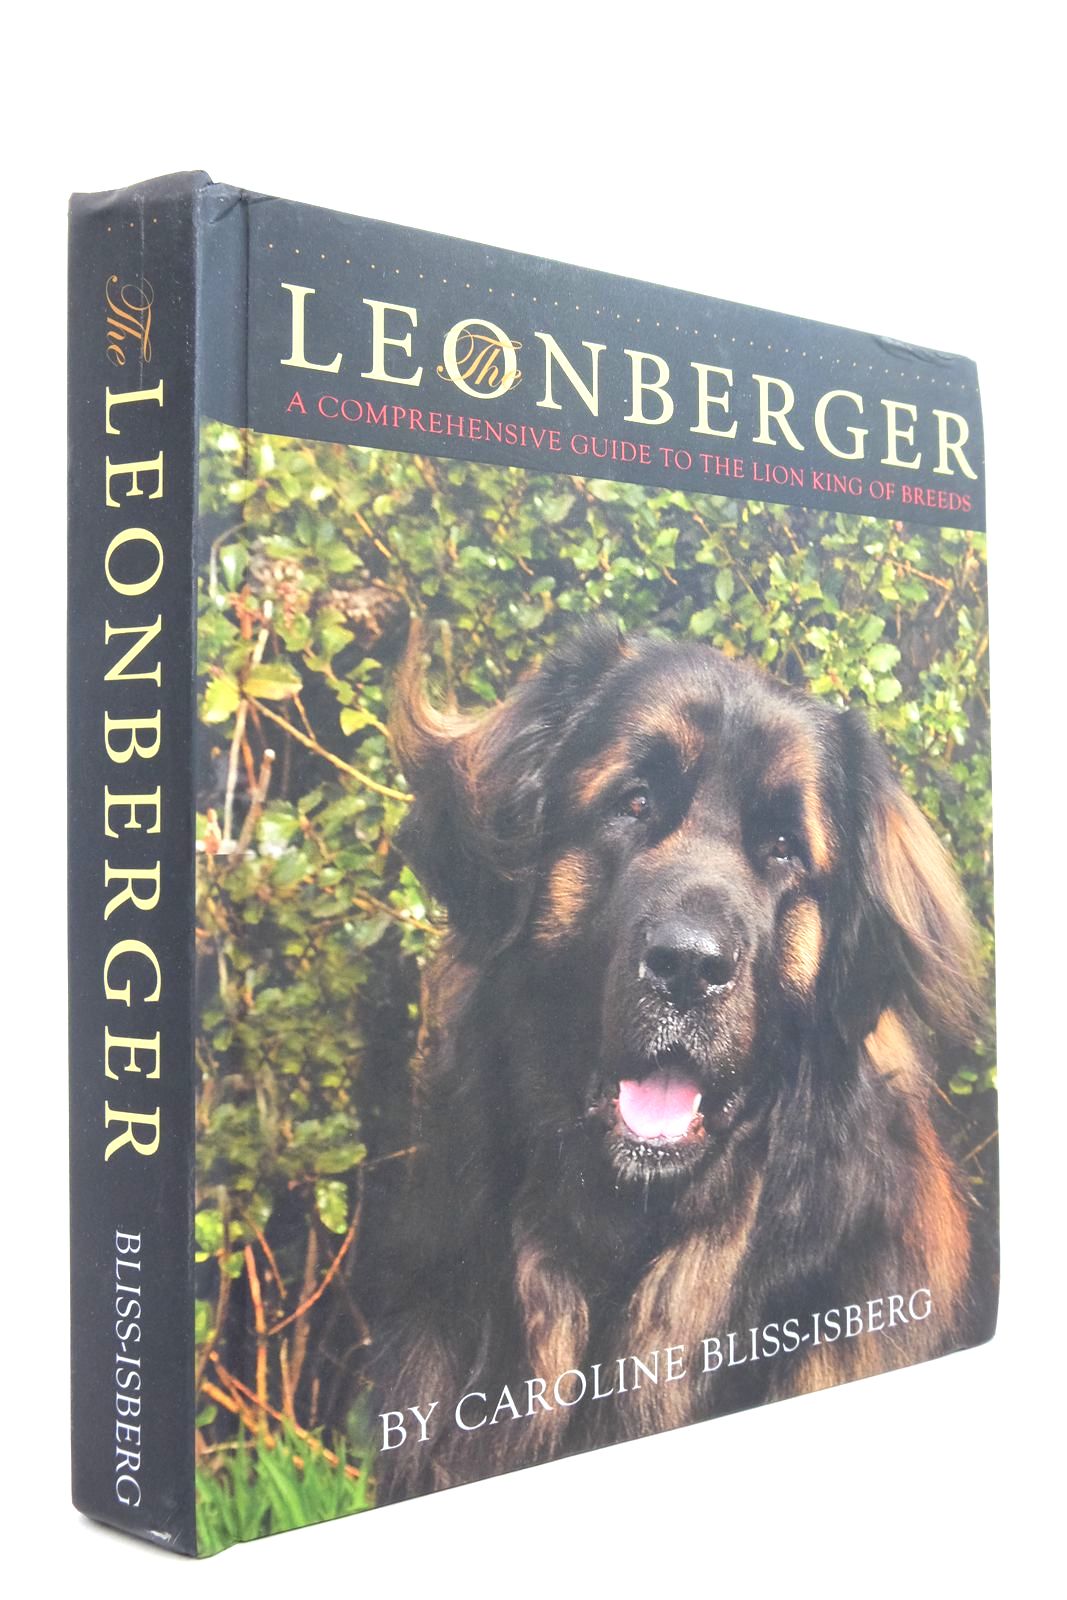 Photo of THE LEONBERGER: A COMPREHENSIVE GUIDE TO THE LION KING OF BREEDS- Stock Number: 2140076